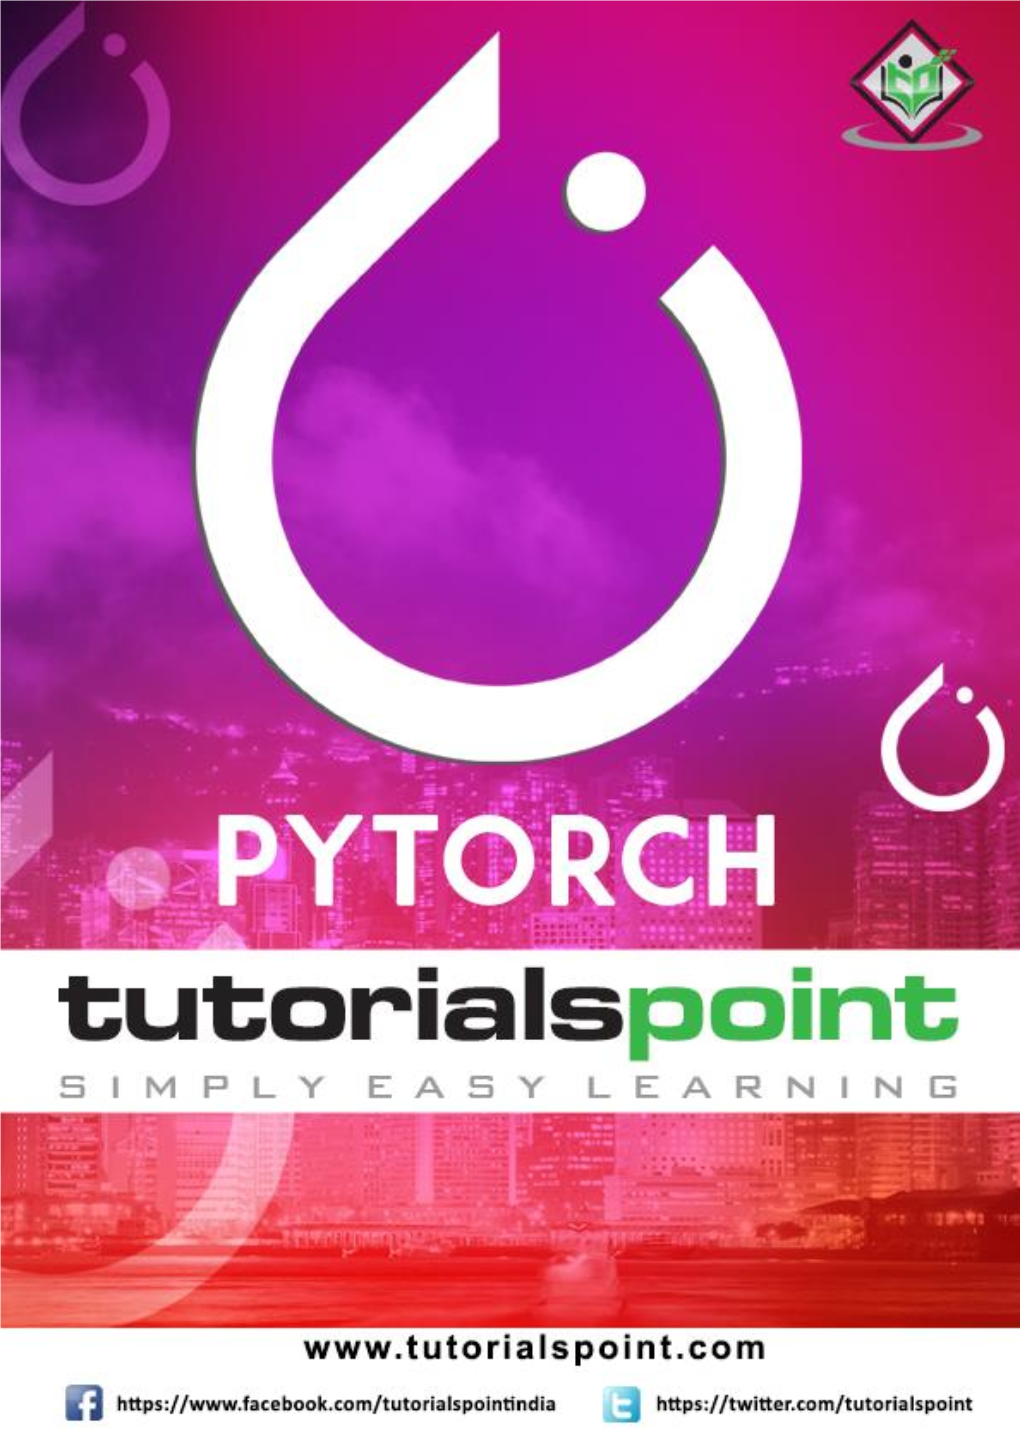 Pytorch Is an Open Source Machine Learning Library for Python and Is Completely Based on Torch